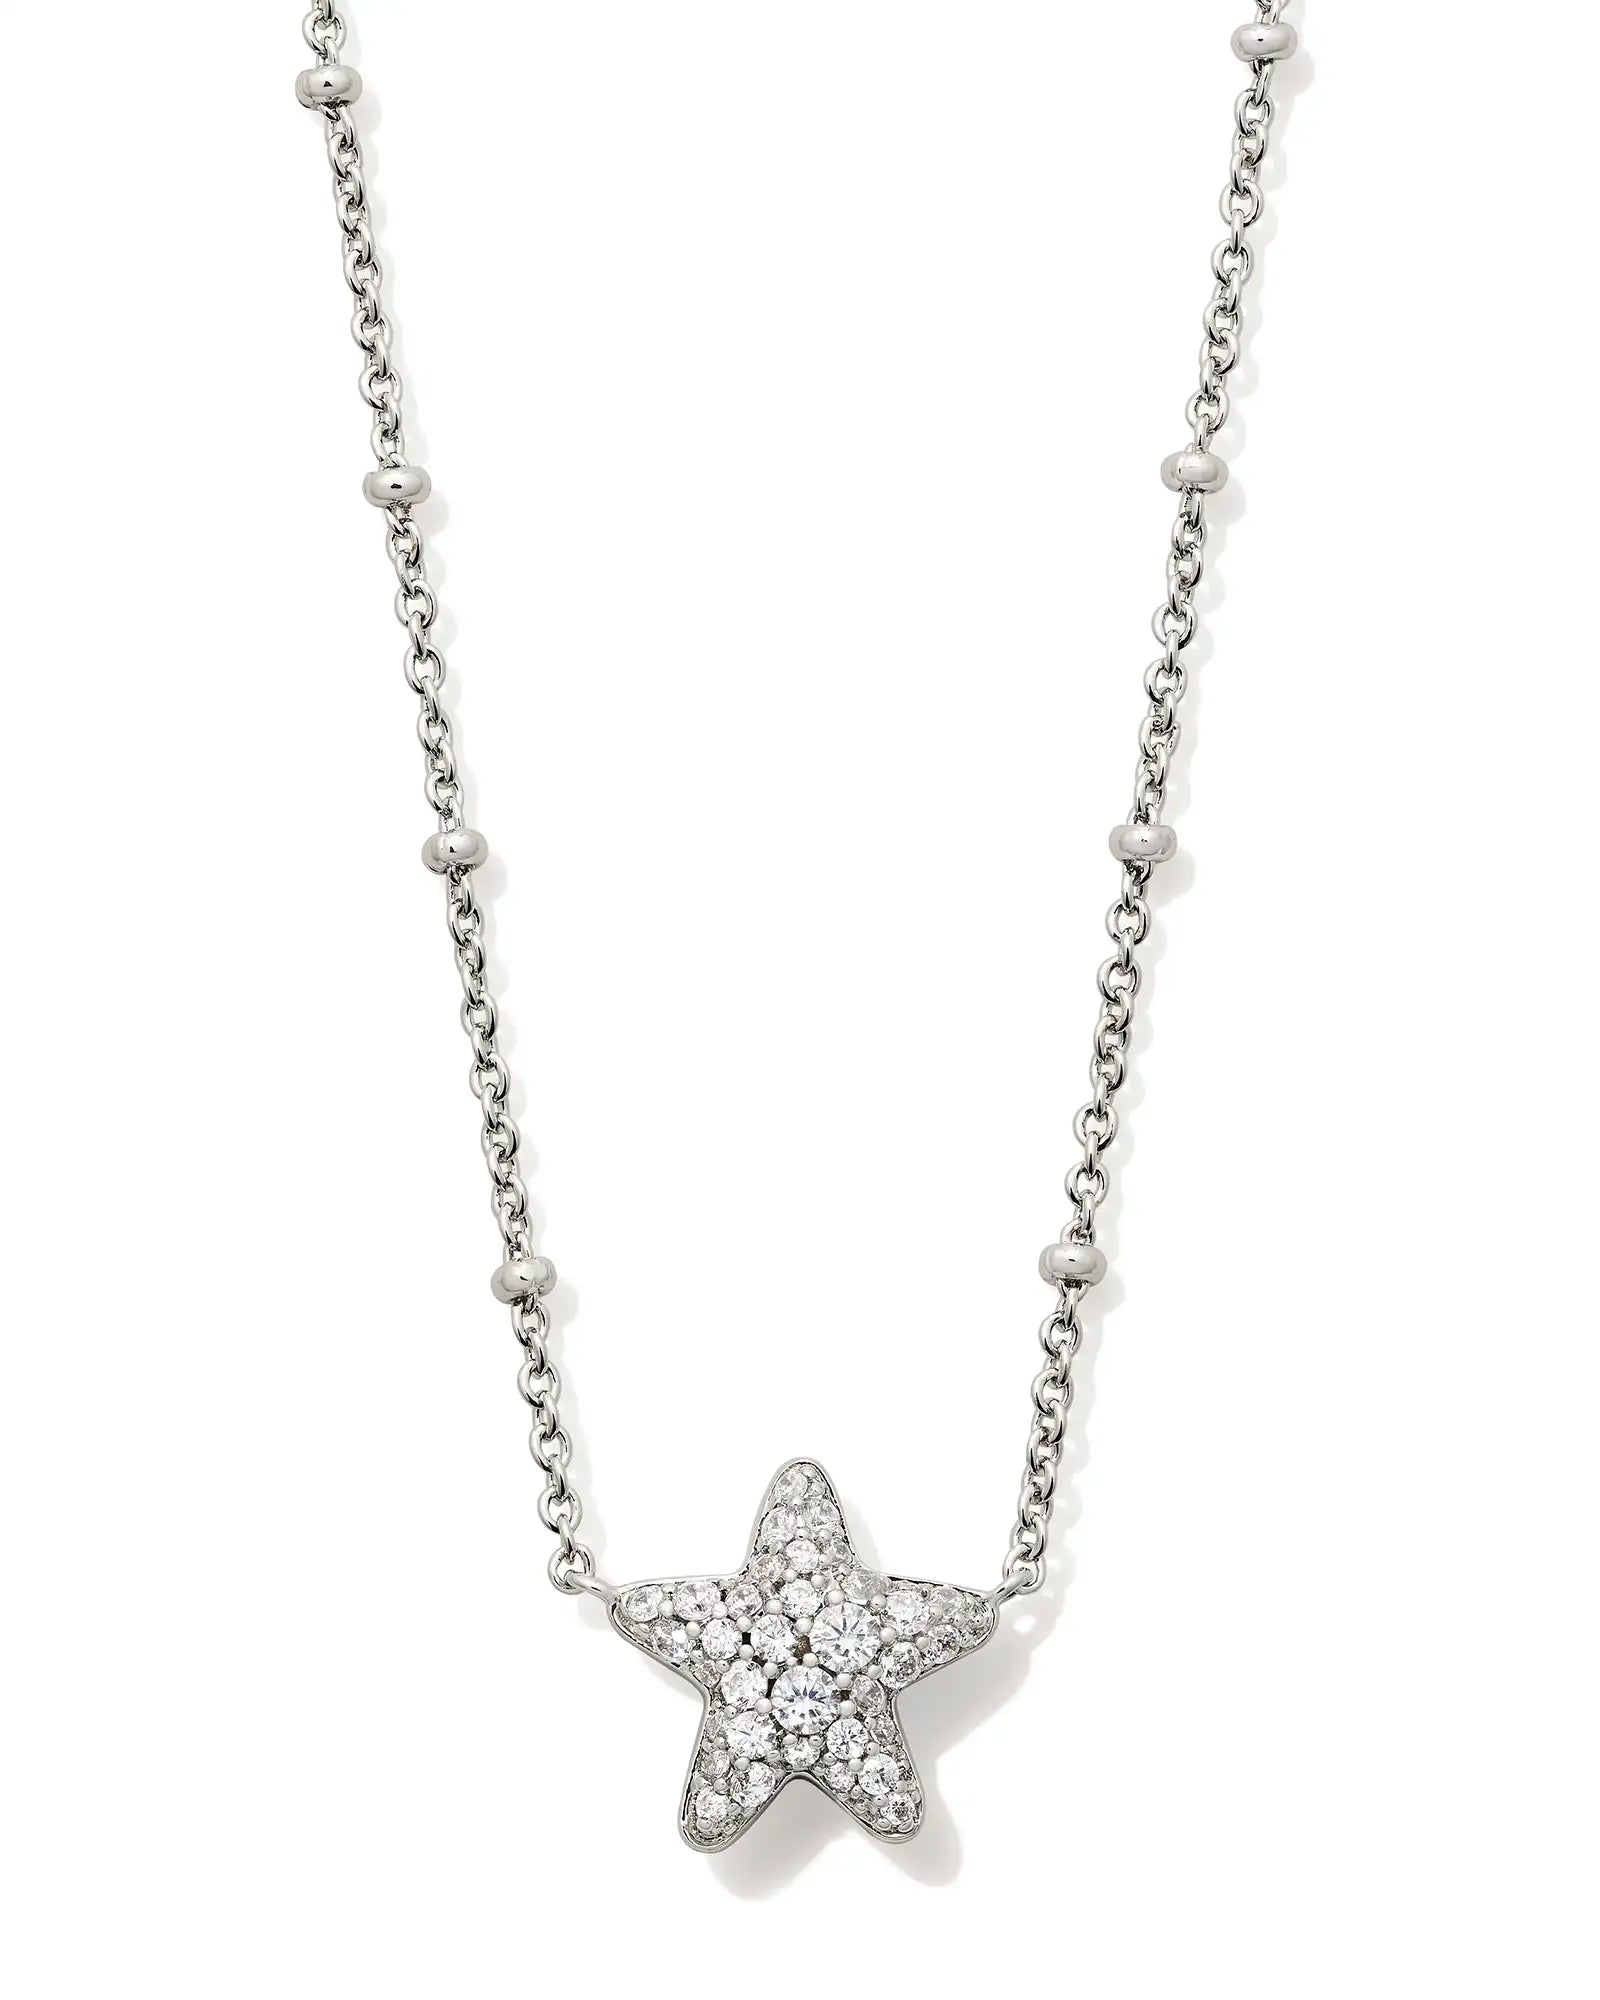 JAE STAR PAVE SHORT PENDANT NECKLACE - SILVER WHITE CRYSTAL